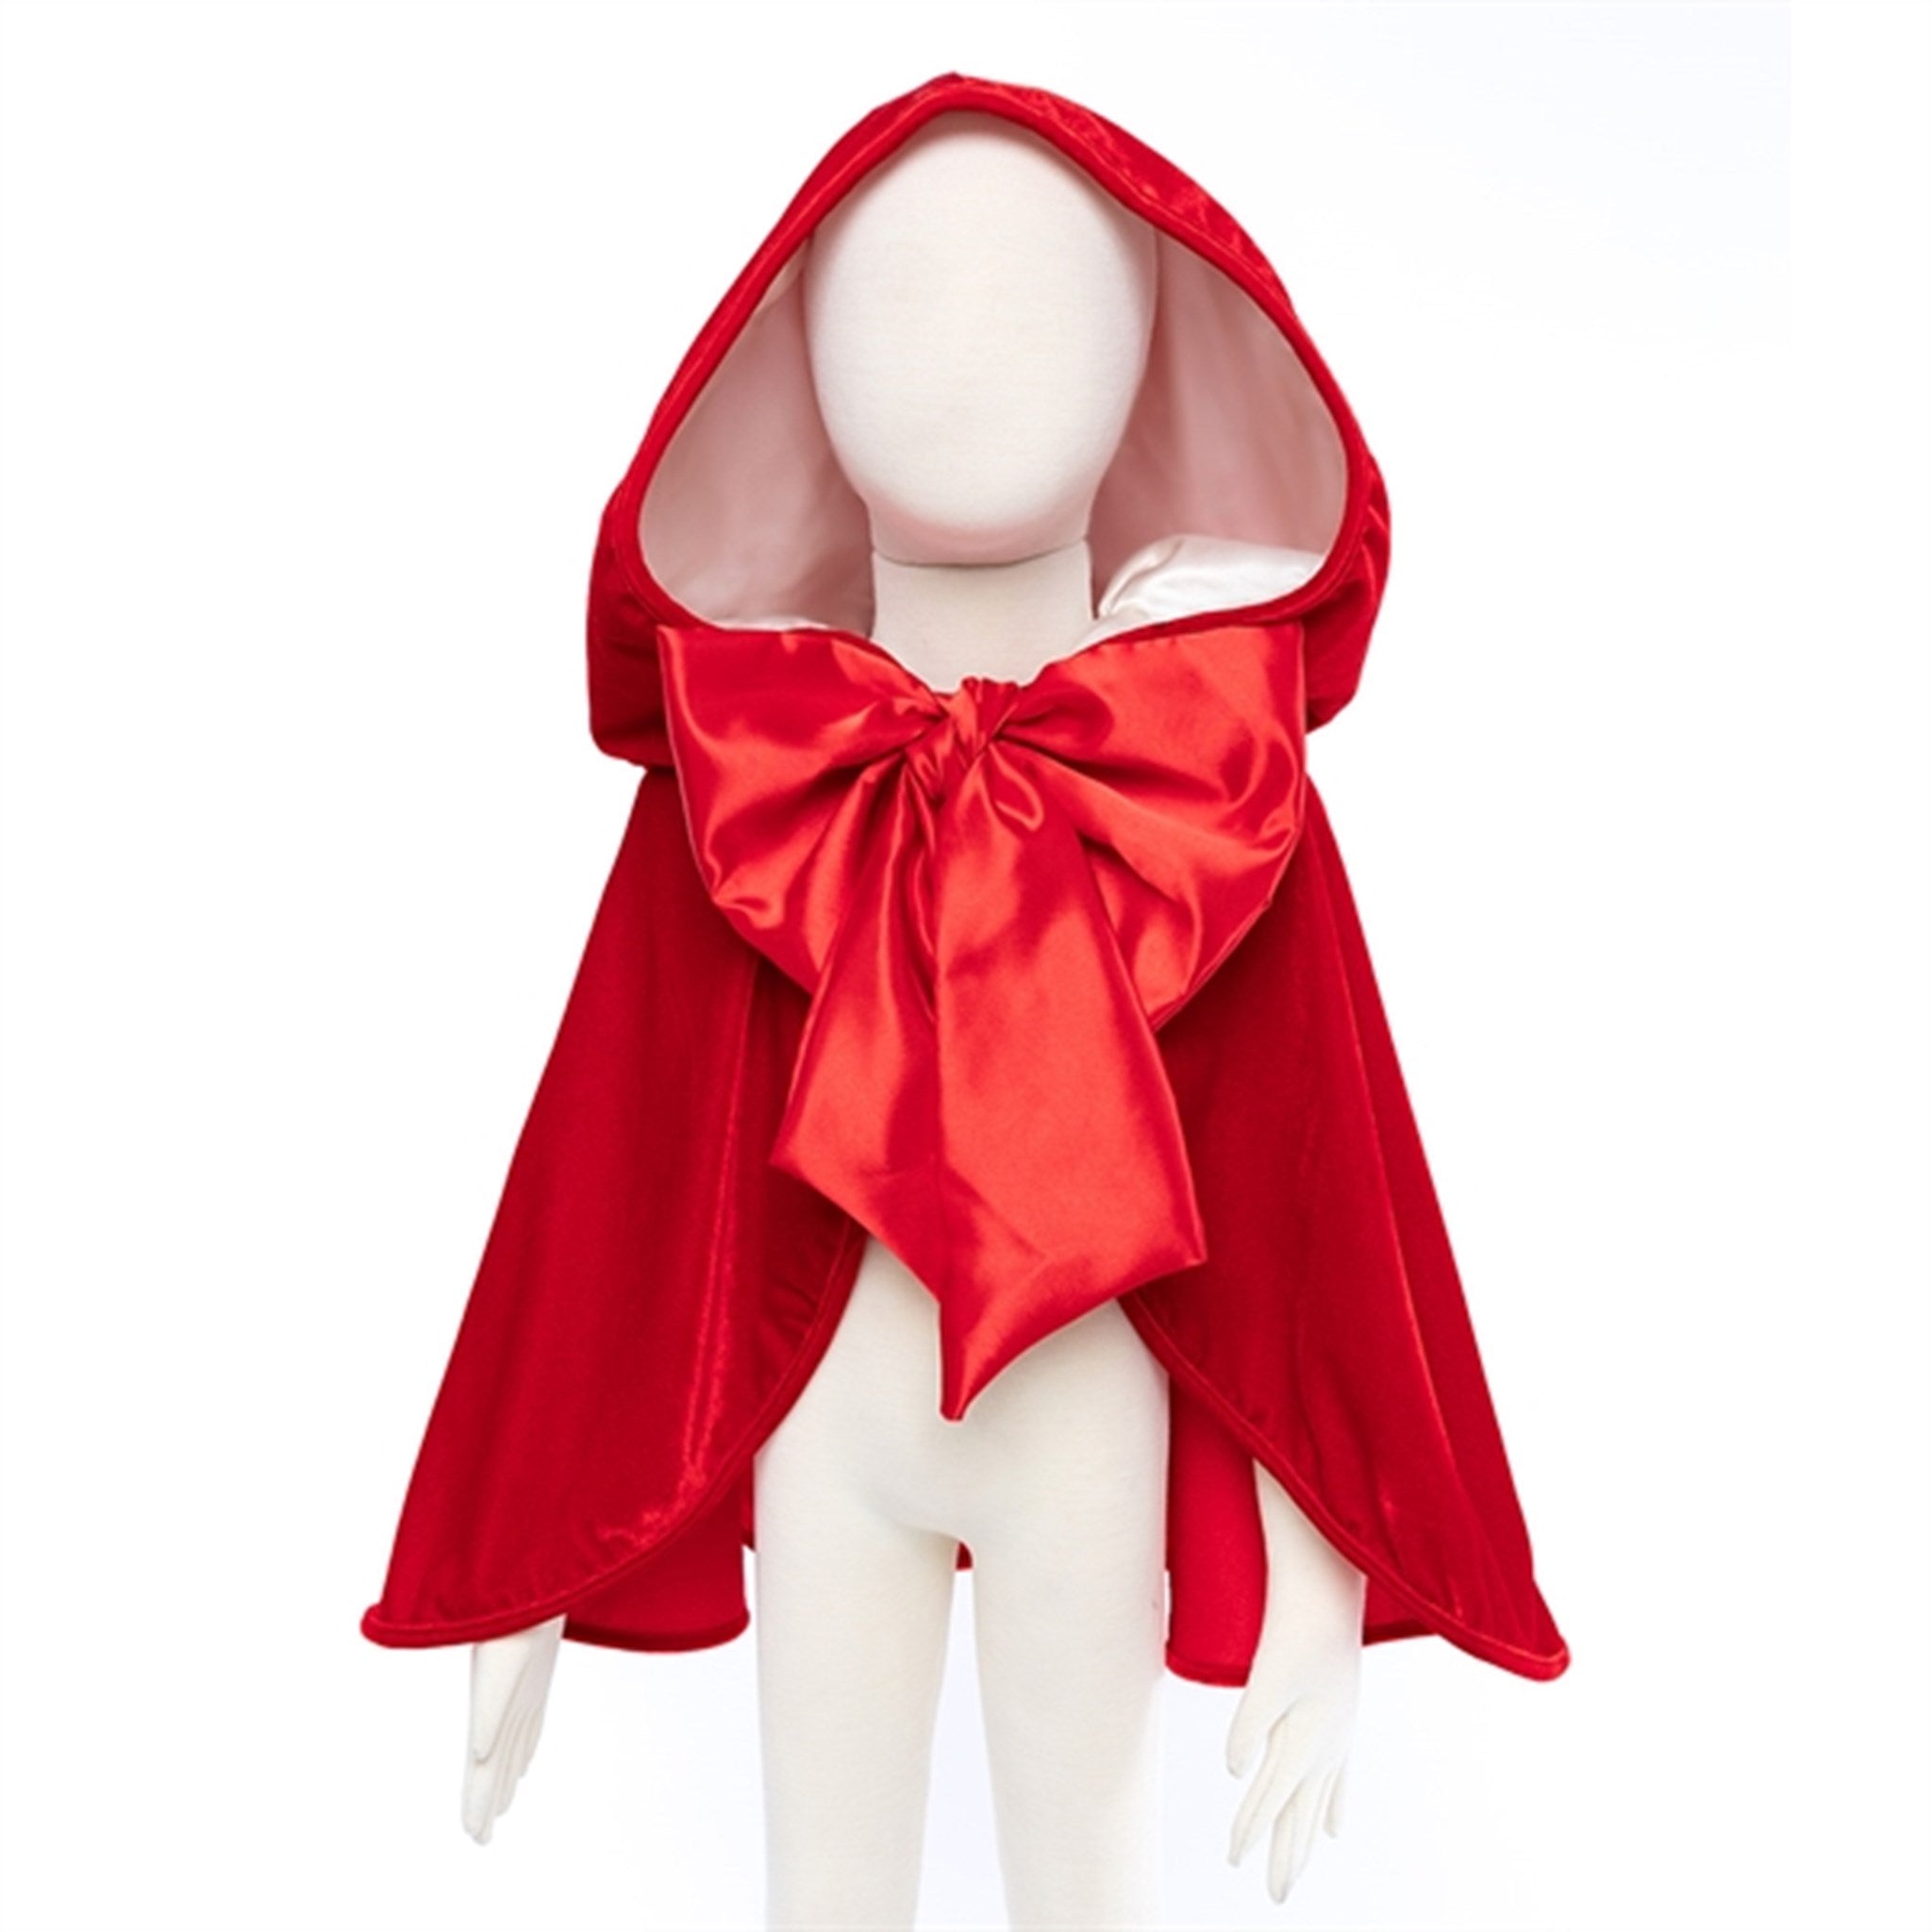 Great Pretenders Woodland Little Red Riding Hood